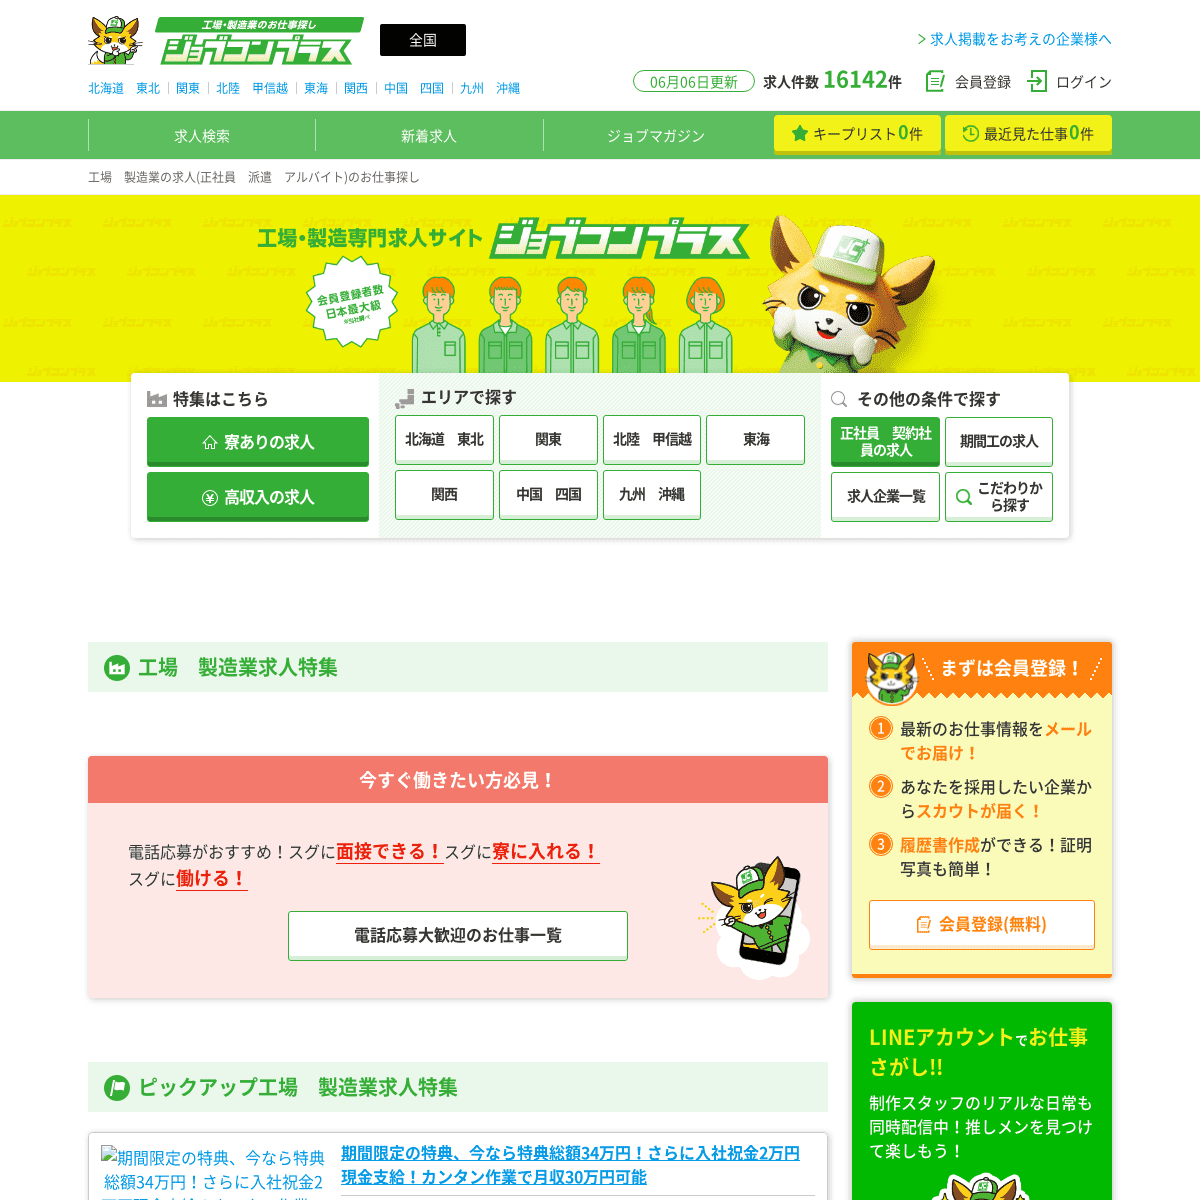 A complete backup of https://job-con.jp